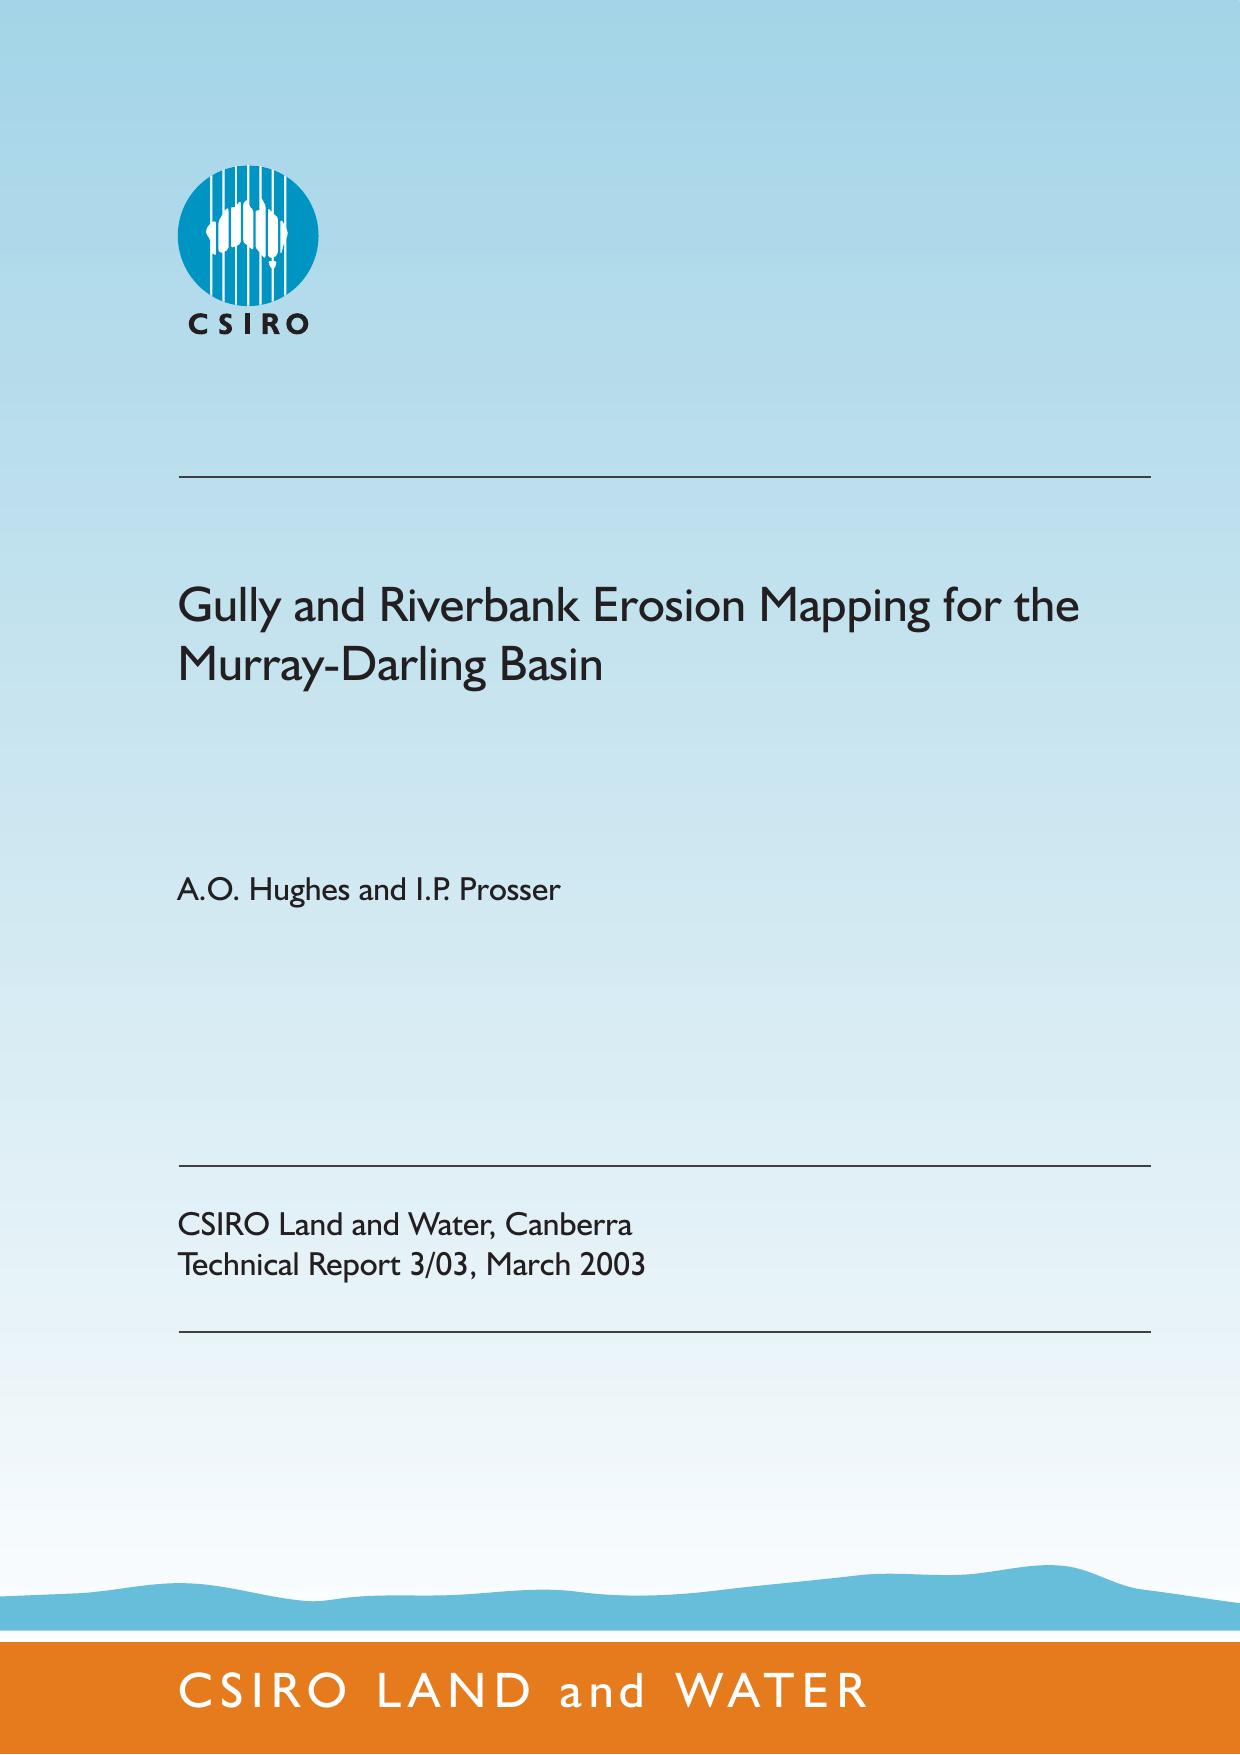 Gully and Riverbank Erosion Mapping for the Murray-Darling Basin